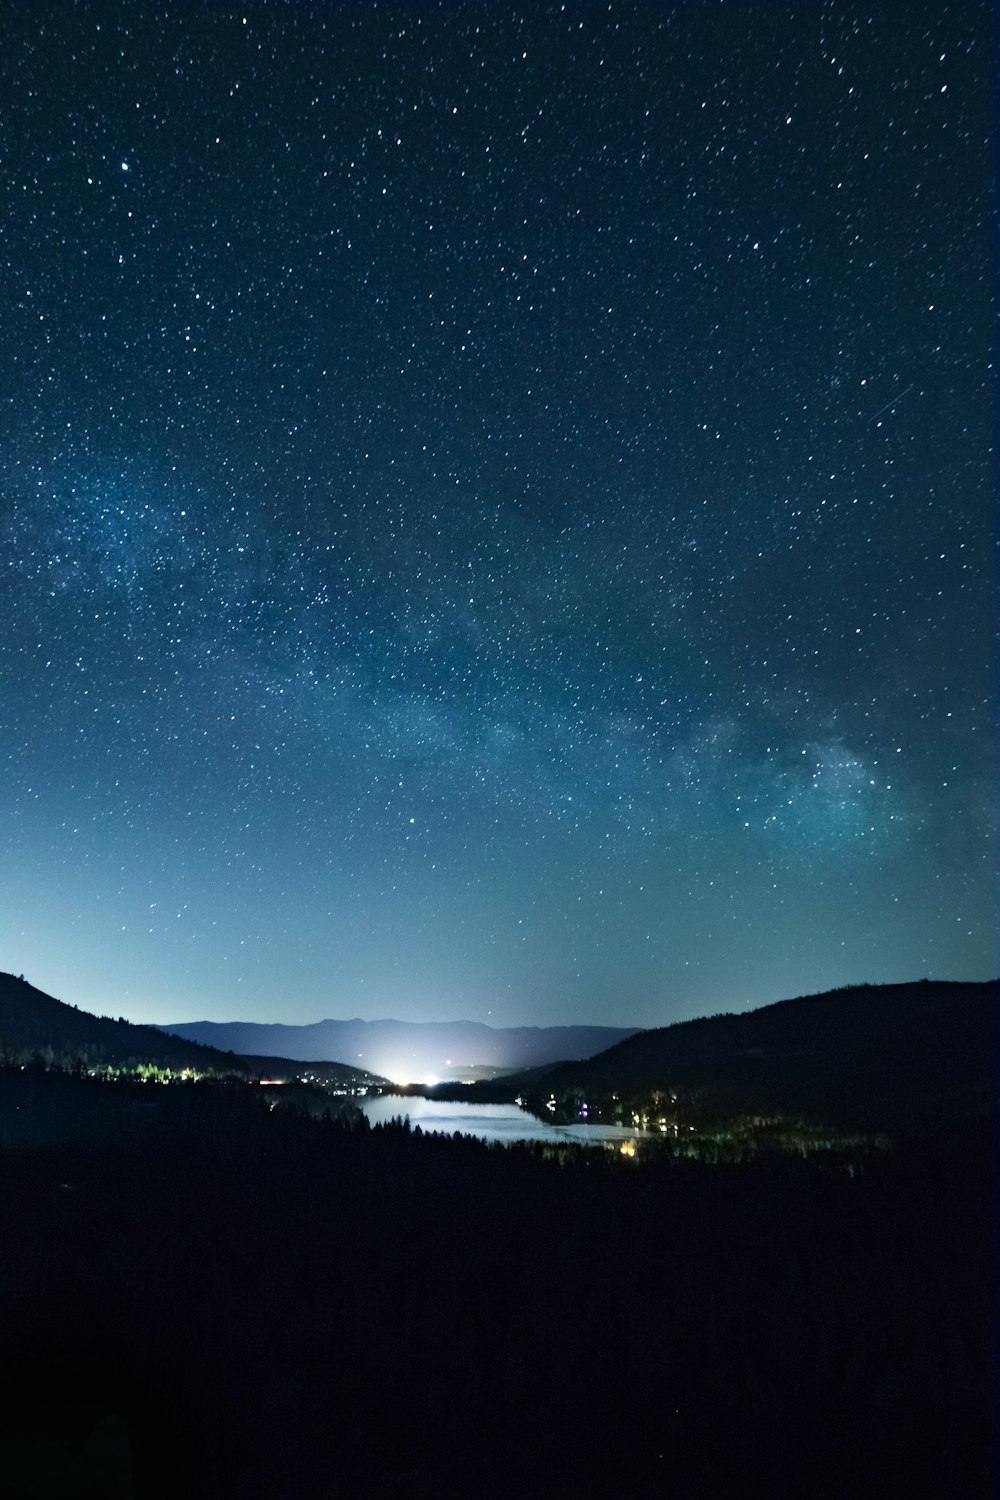 the night sky with stars above a lake